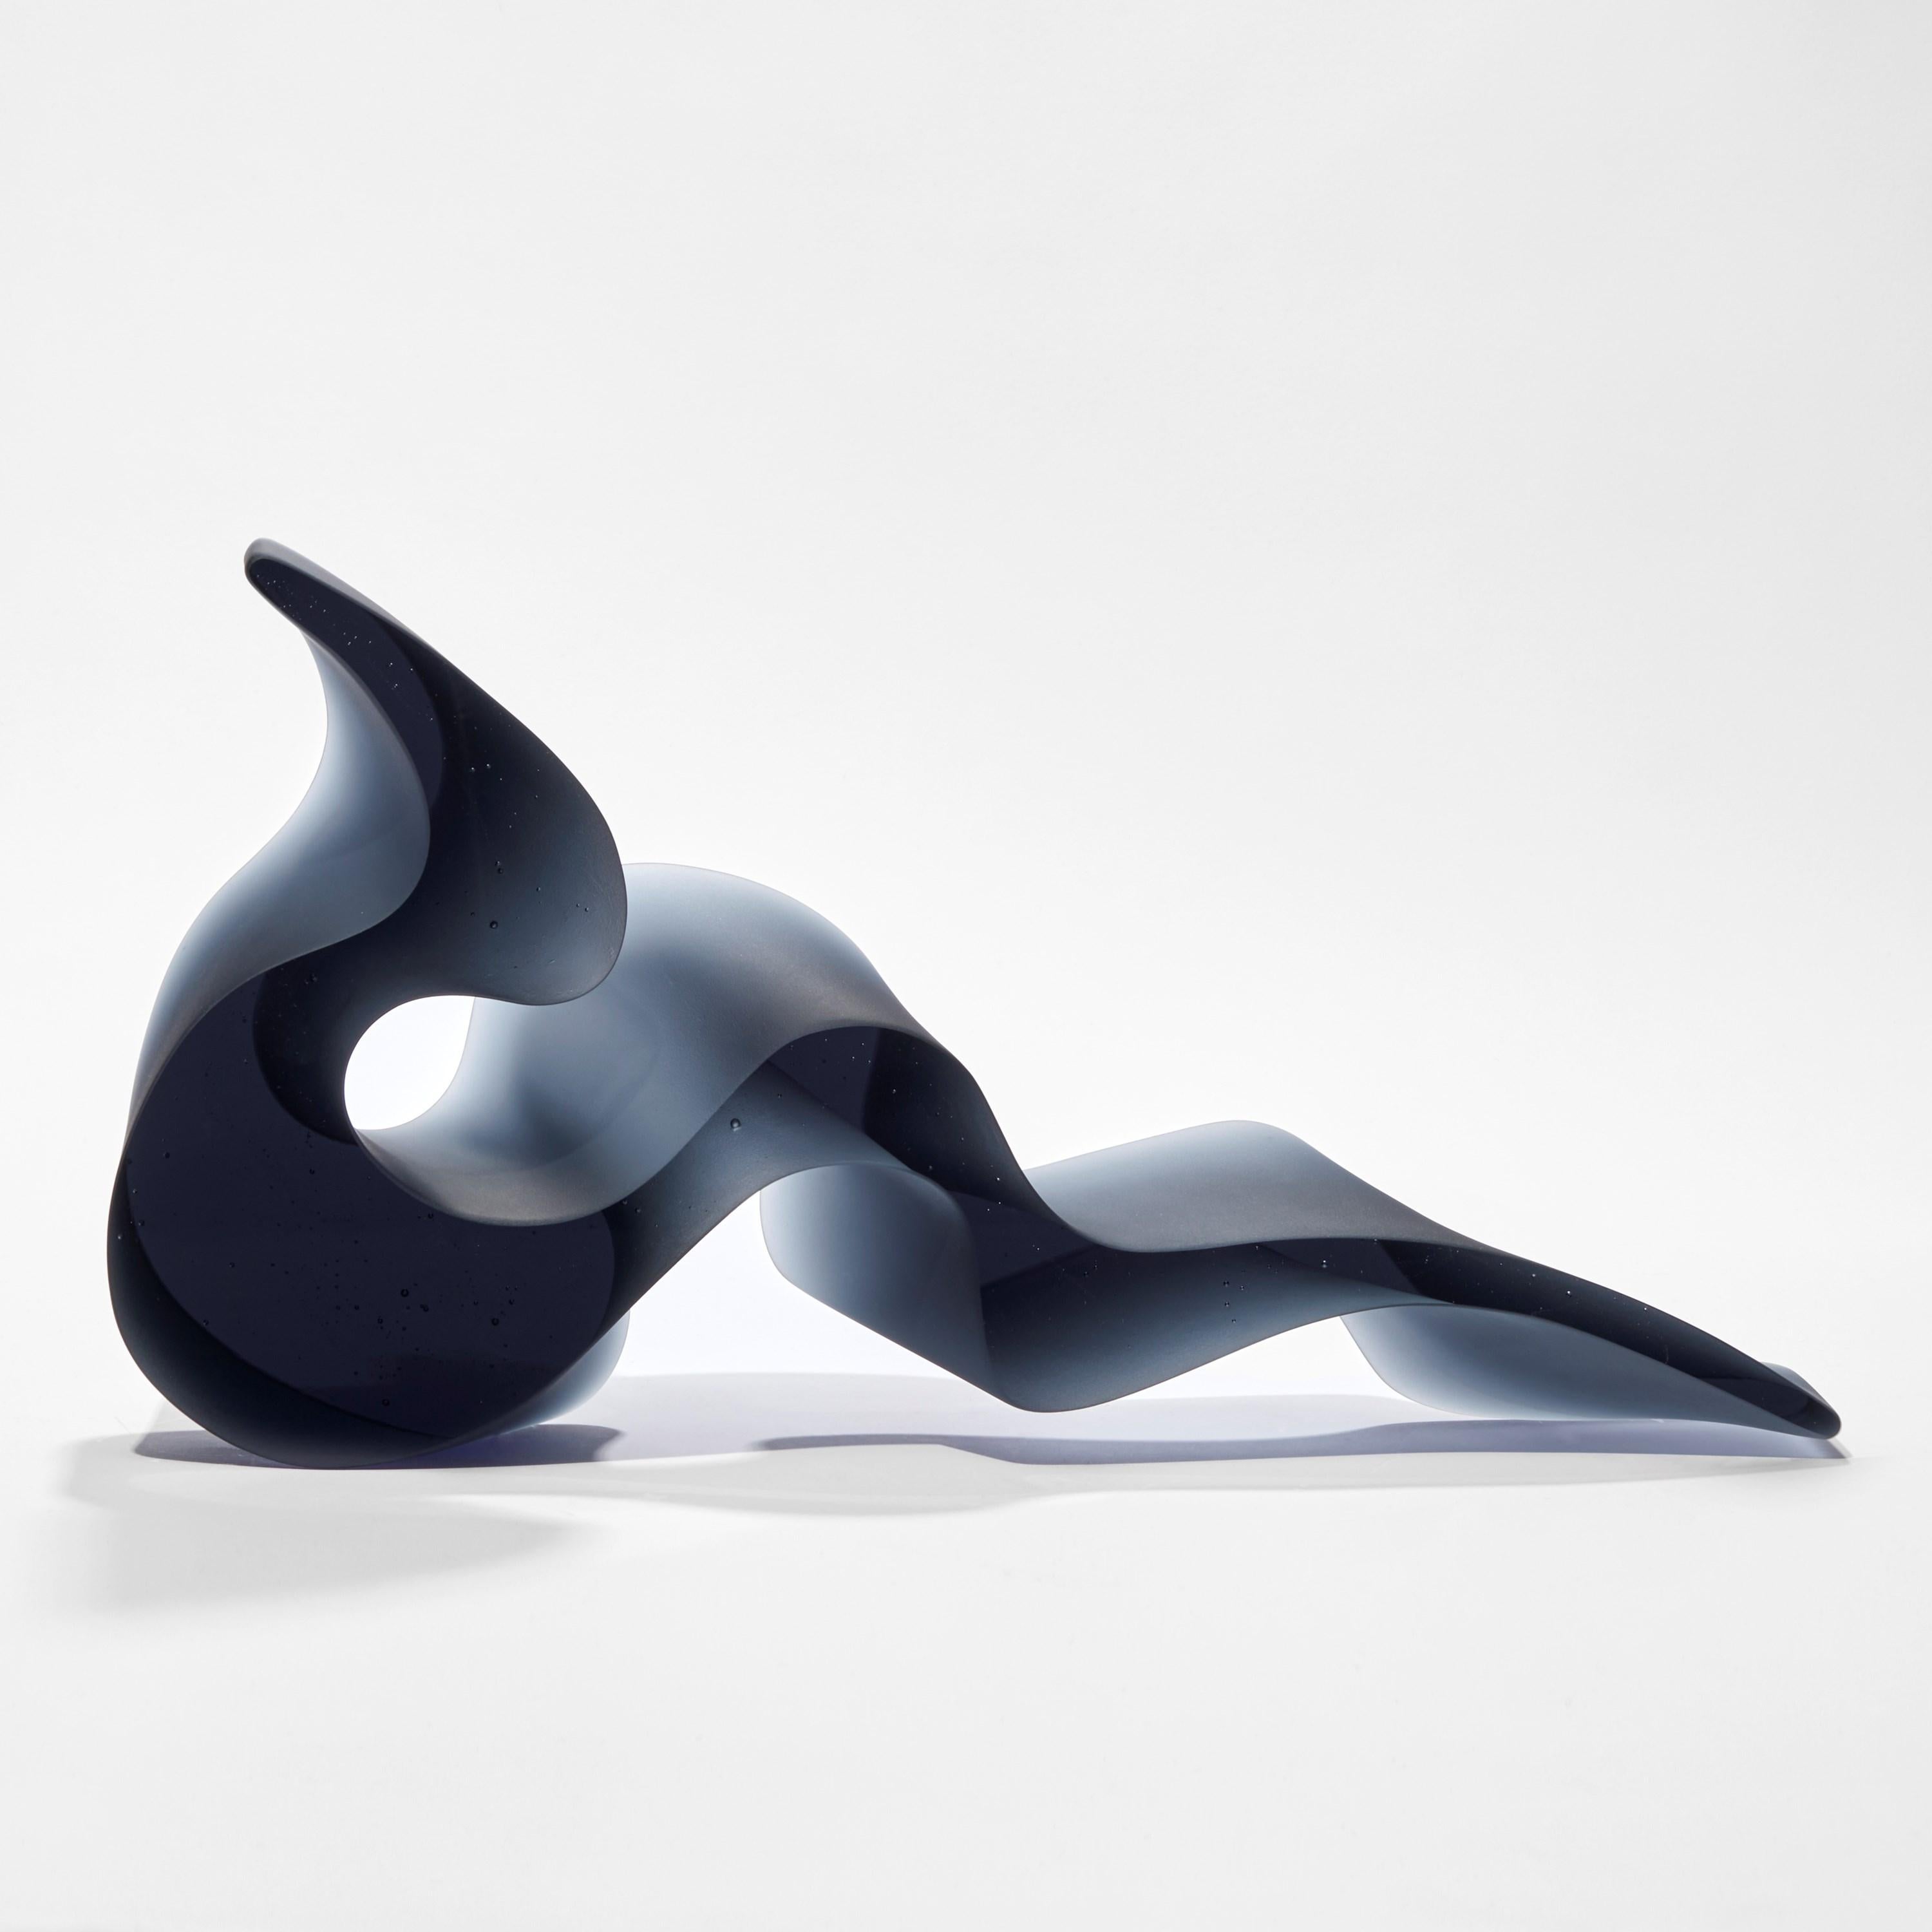 'Fluid Gestures Steel Blue' is a unique cast and hand-made glass sculpture by the Danish artist, Karin Mørch.

Mørch’s inspiration often derives from simple expressions and in the contrast between the linear and the tilted. She sees beauty in the